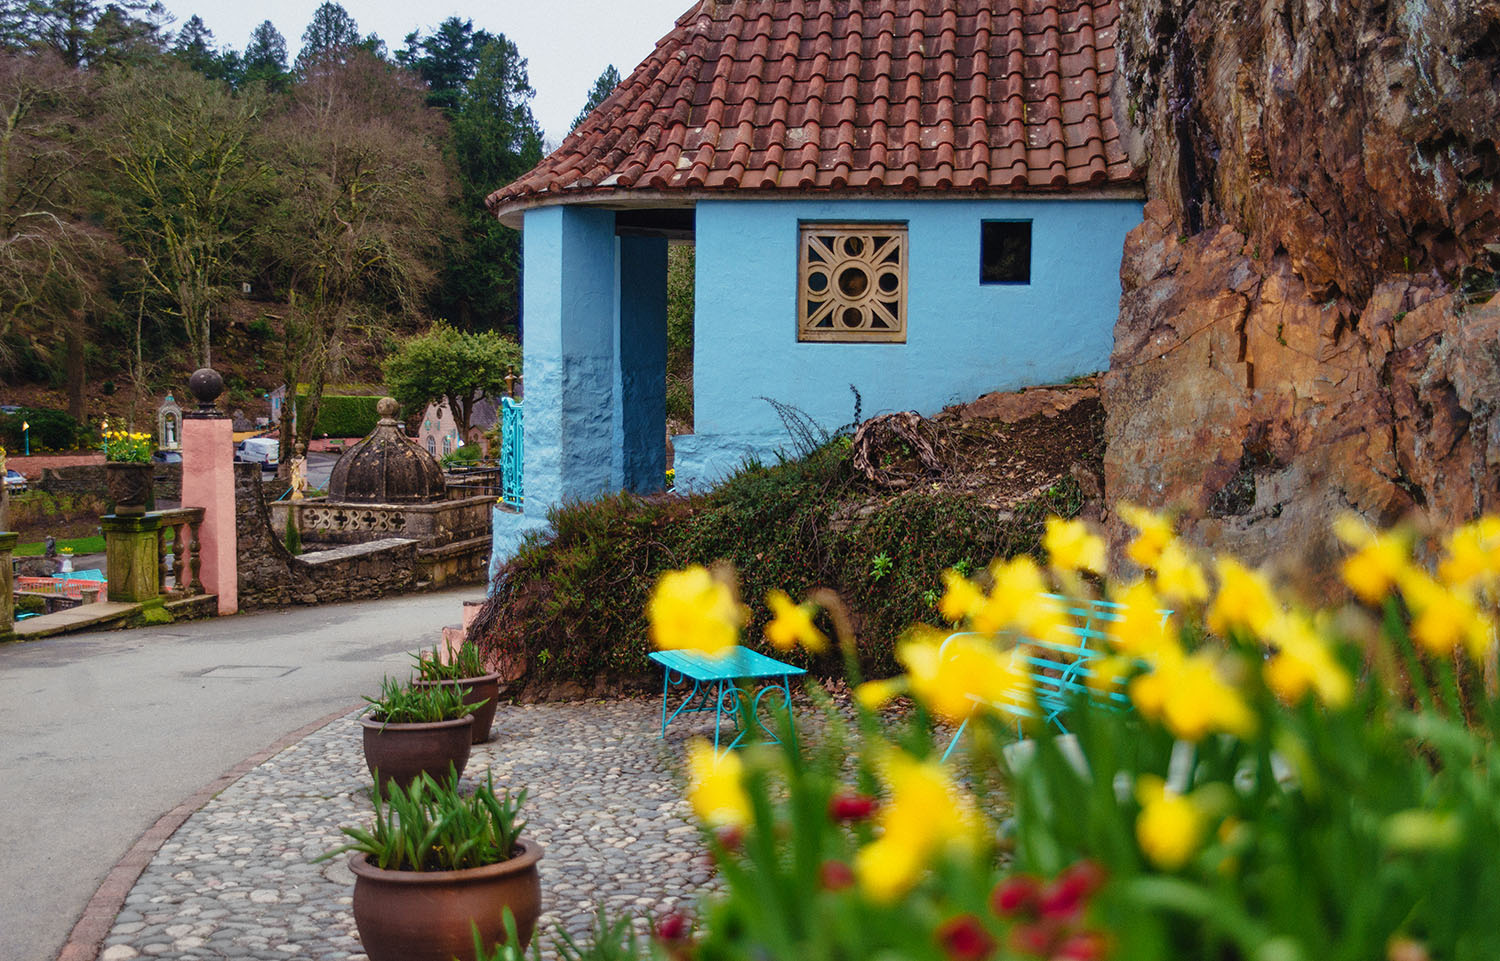 Portmeirion Village in North Wales